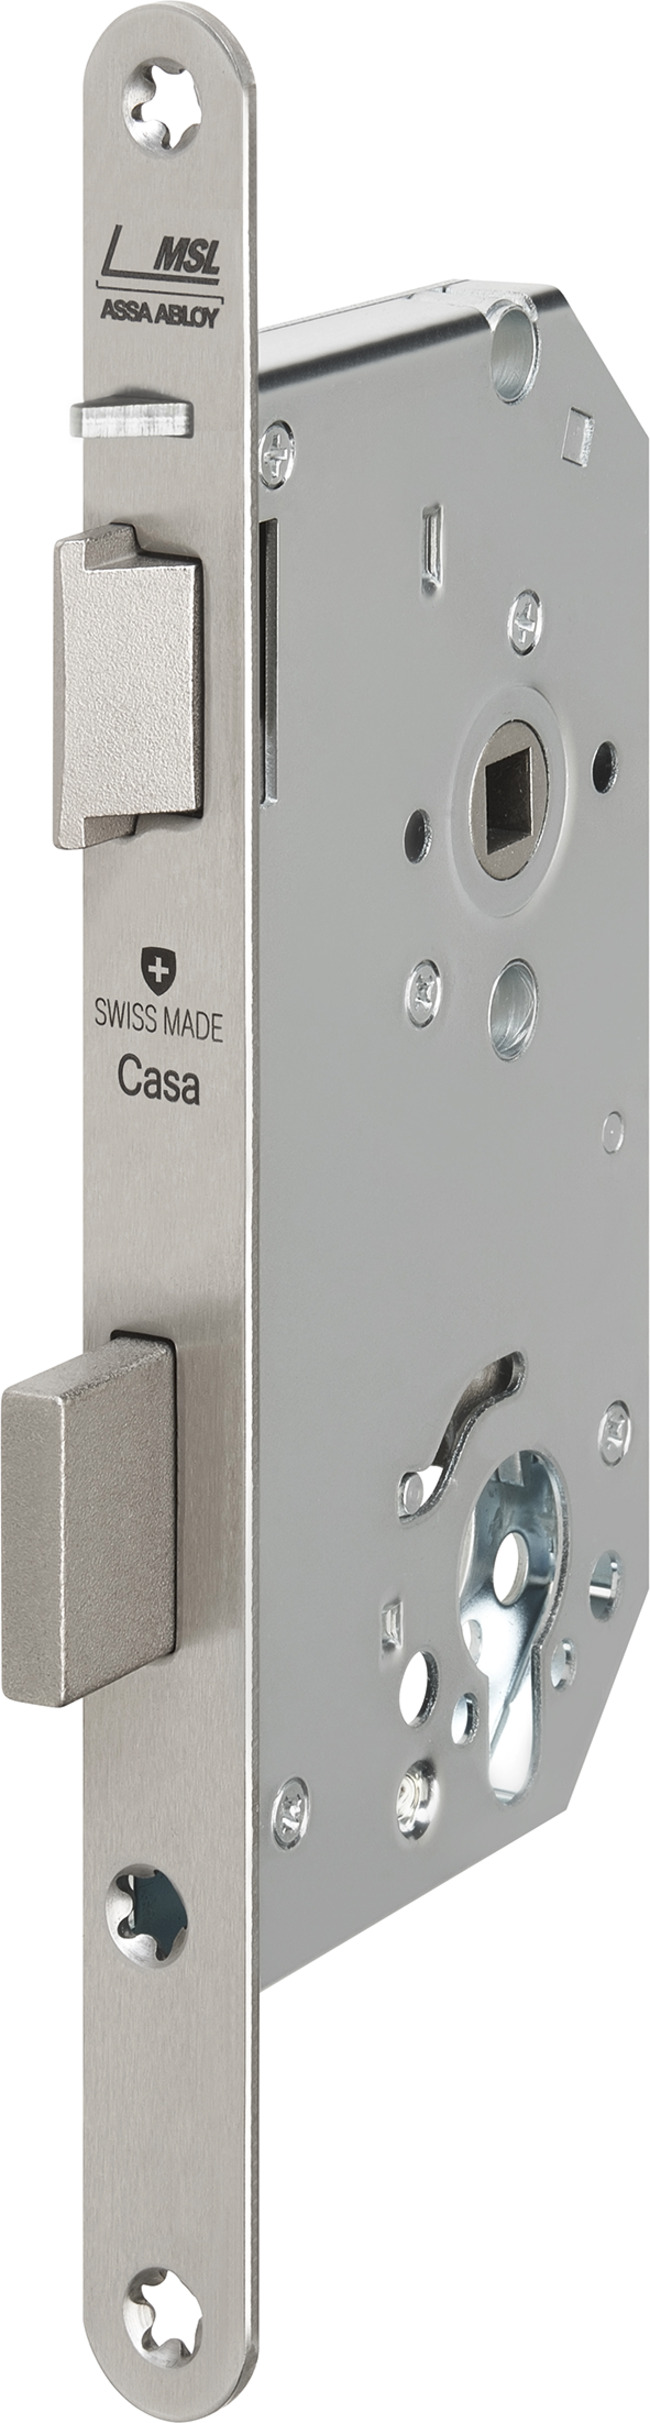 Security mortise lock with latch securing 1255-FS